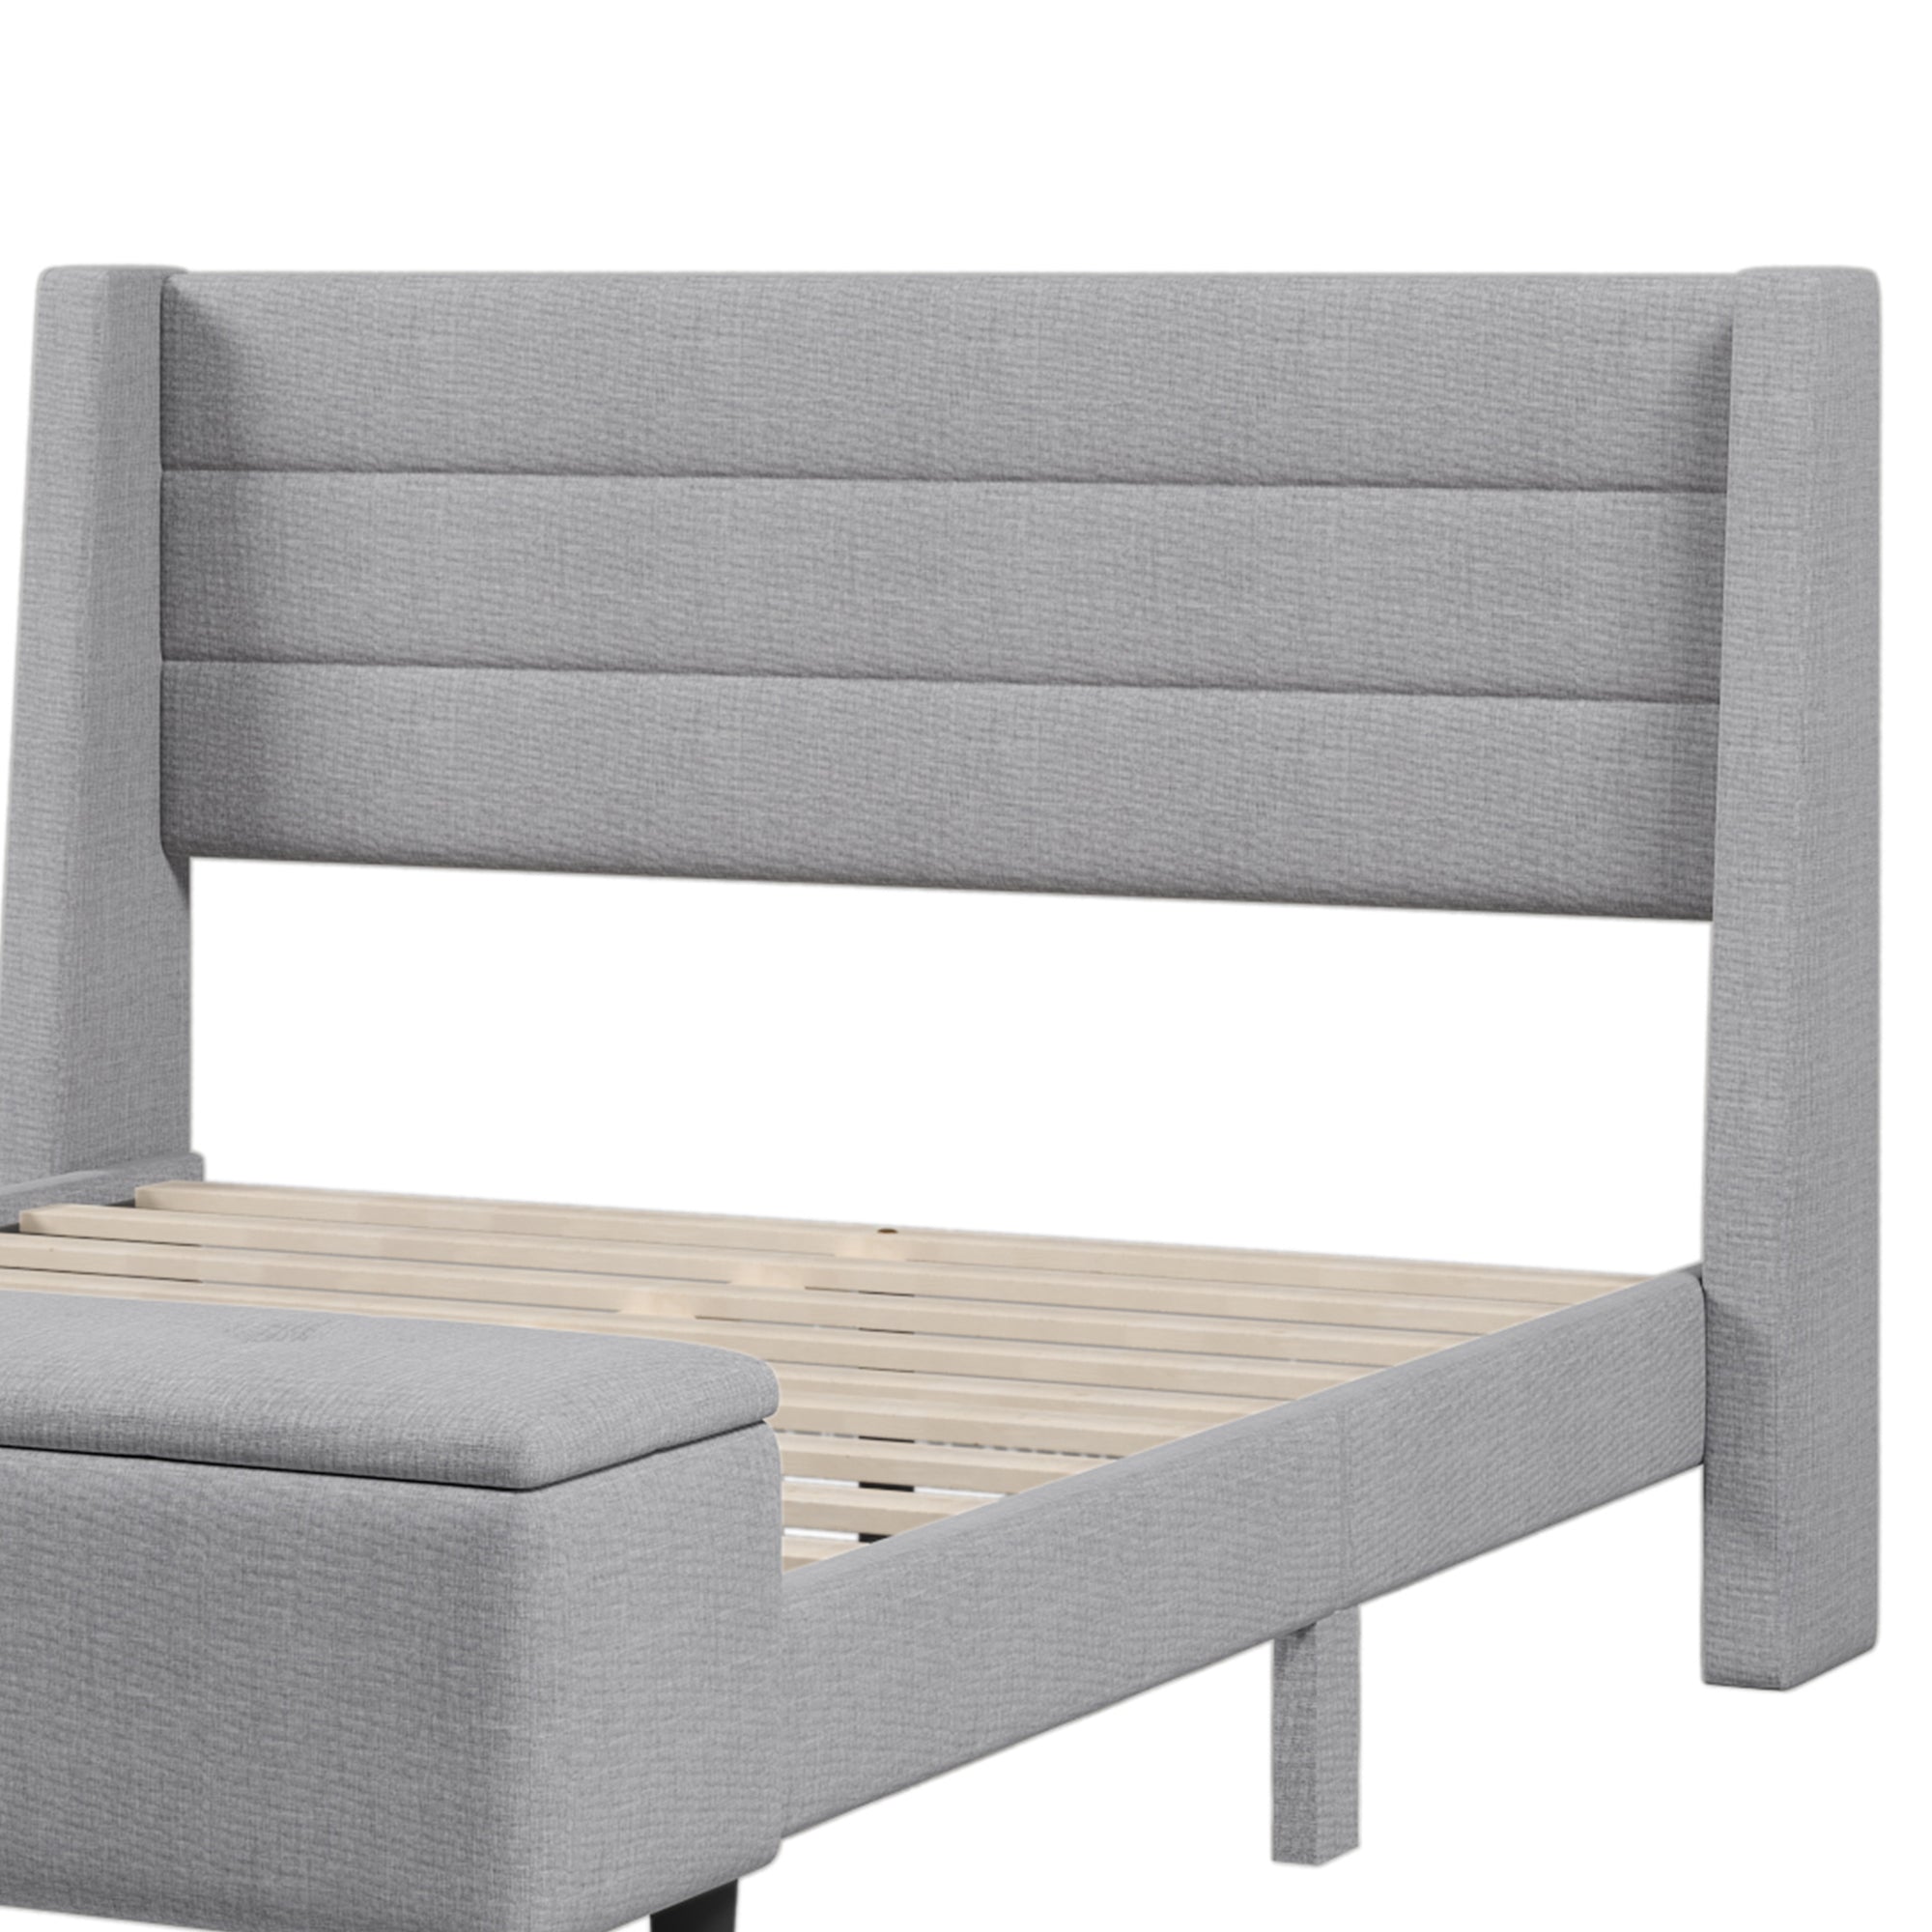 Upholstered Storage Bed Frame with Storage Ottoman Bench, No Box Spring Needed, Queen, Gray